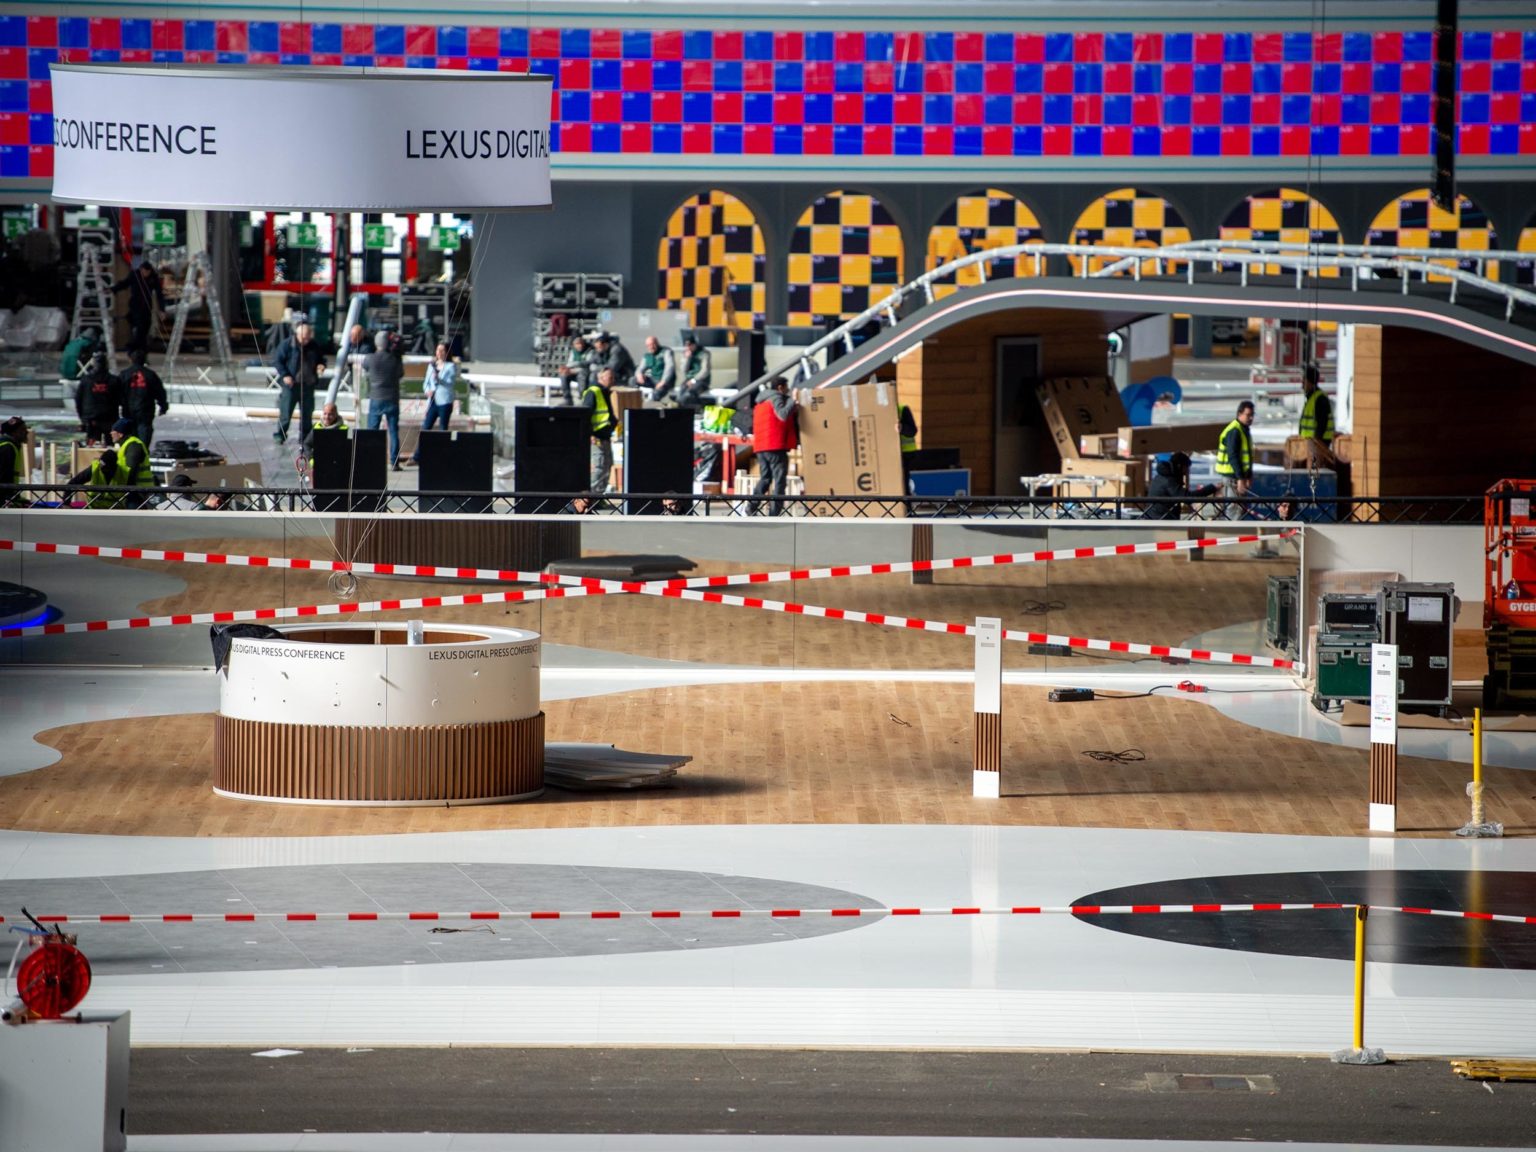 Exhibitors have to dismantle their displays after cancellation of the Geneva International Motor Show on February 28, 2020 in Geneva, Switzerland. Swiss authorities announced today that all upcoming events with more than 1,000 attendees will be cancelled in an attempt to prevent further spread of the coronavirus.